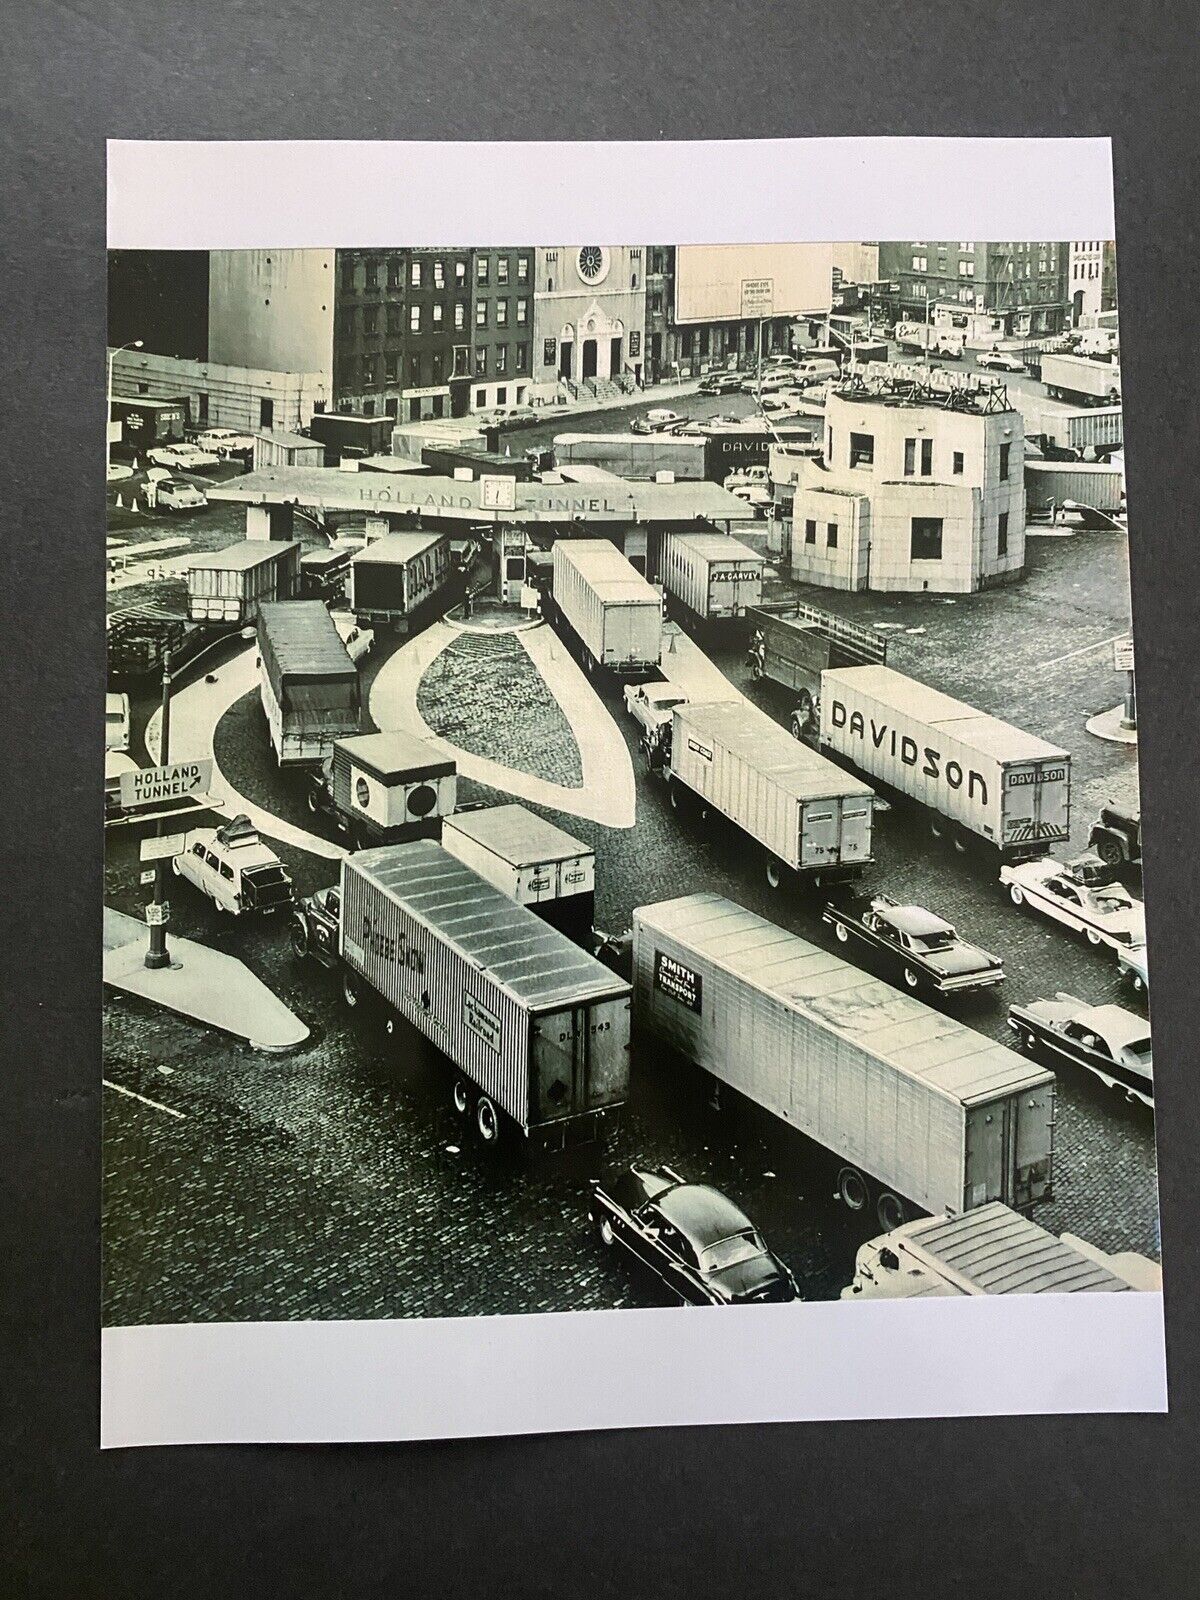 Holland Tunnel 1950’s